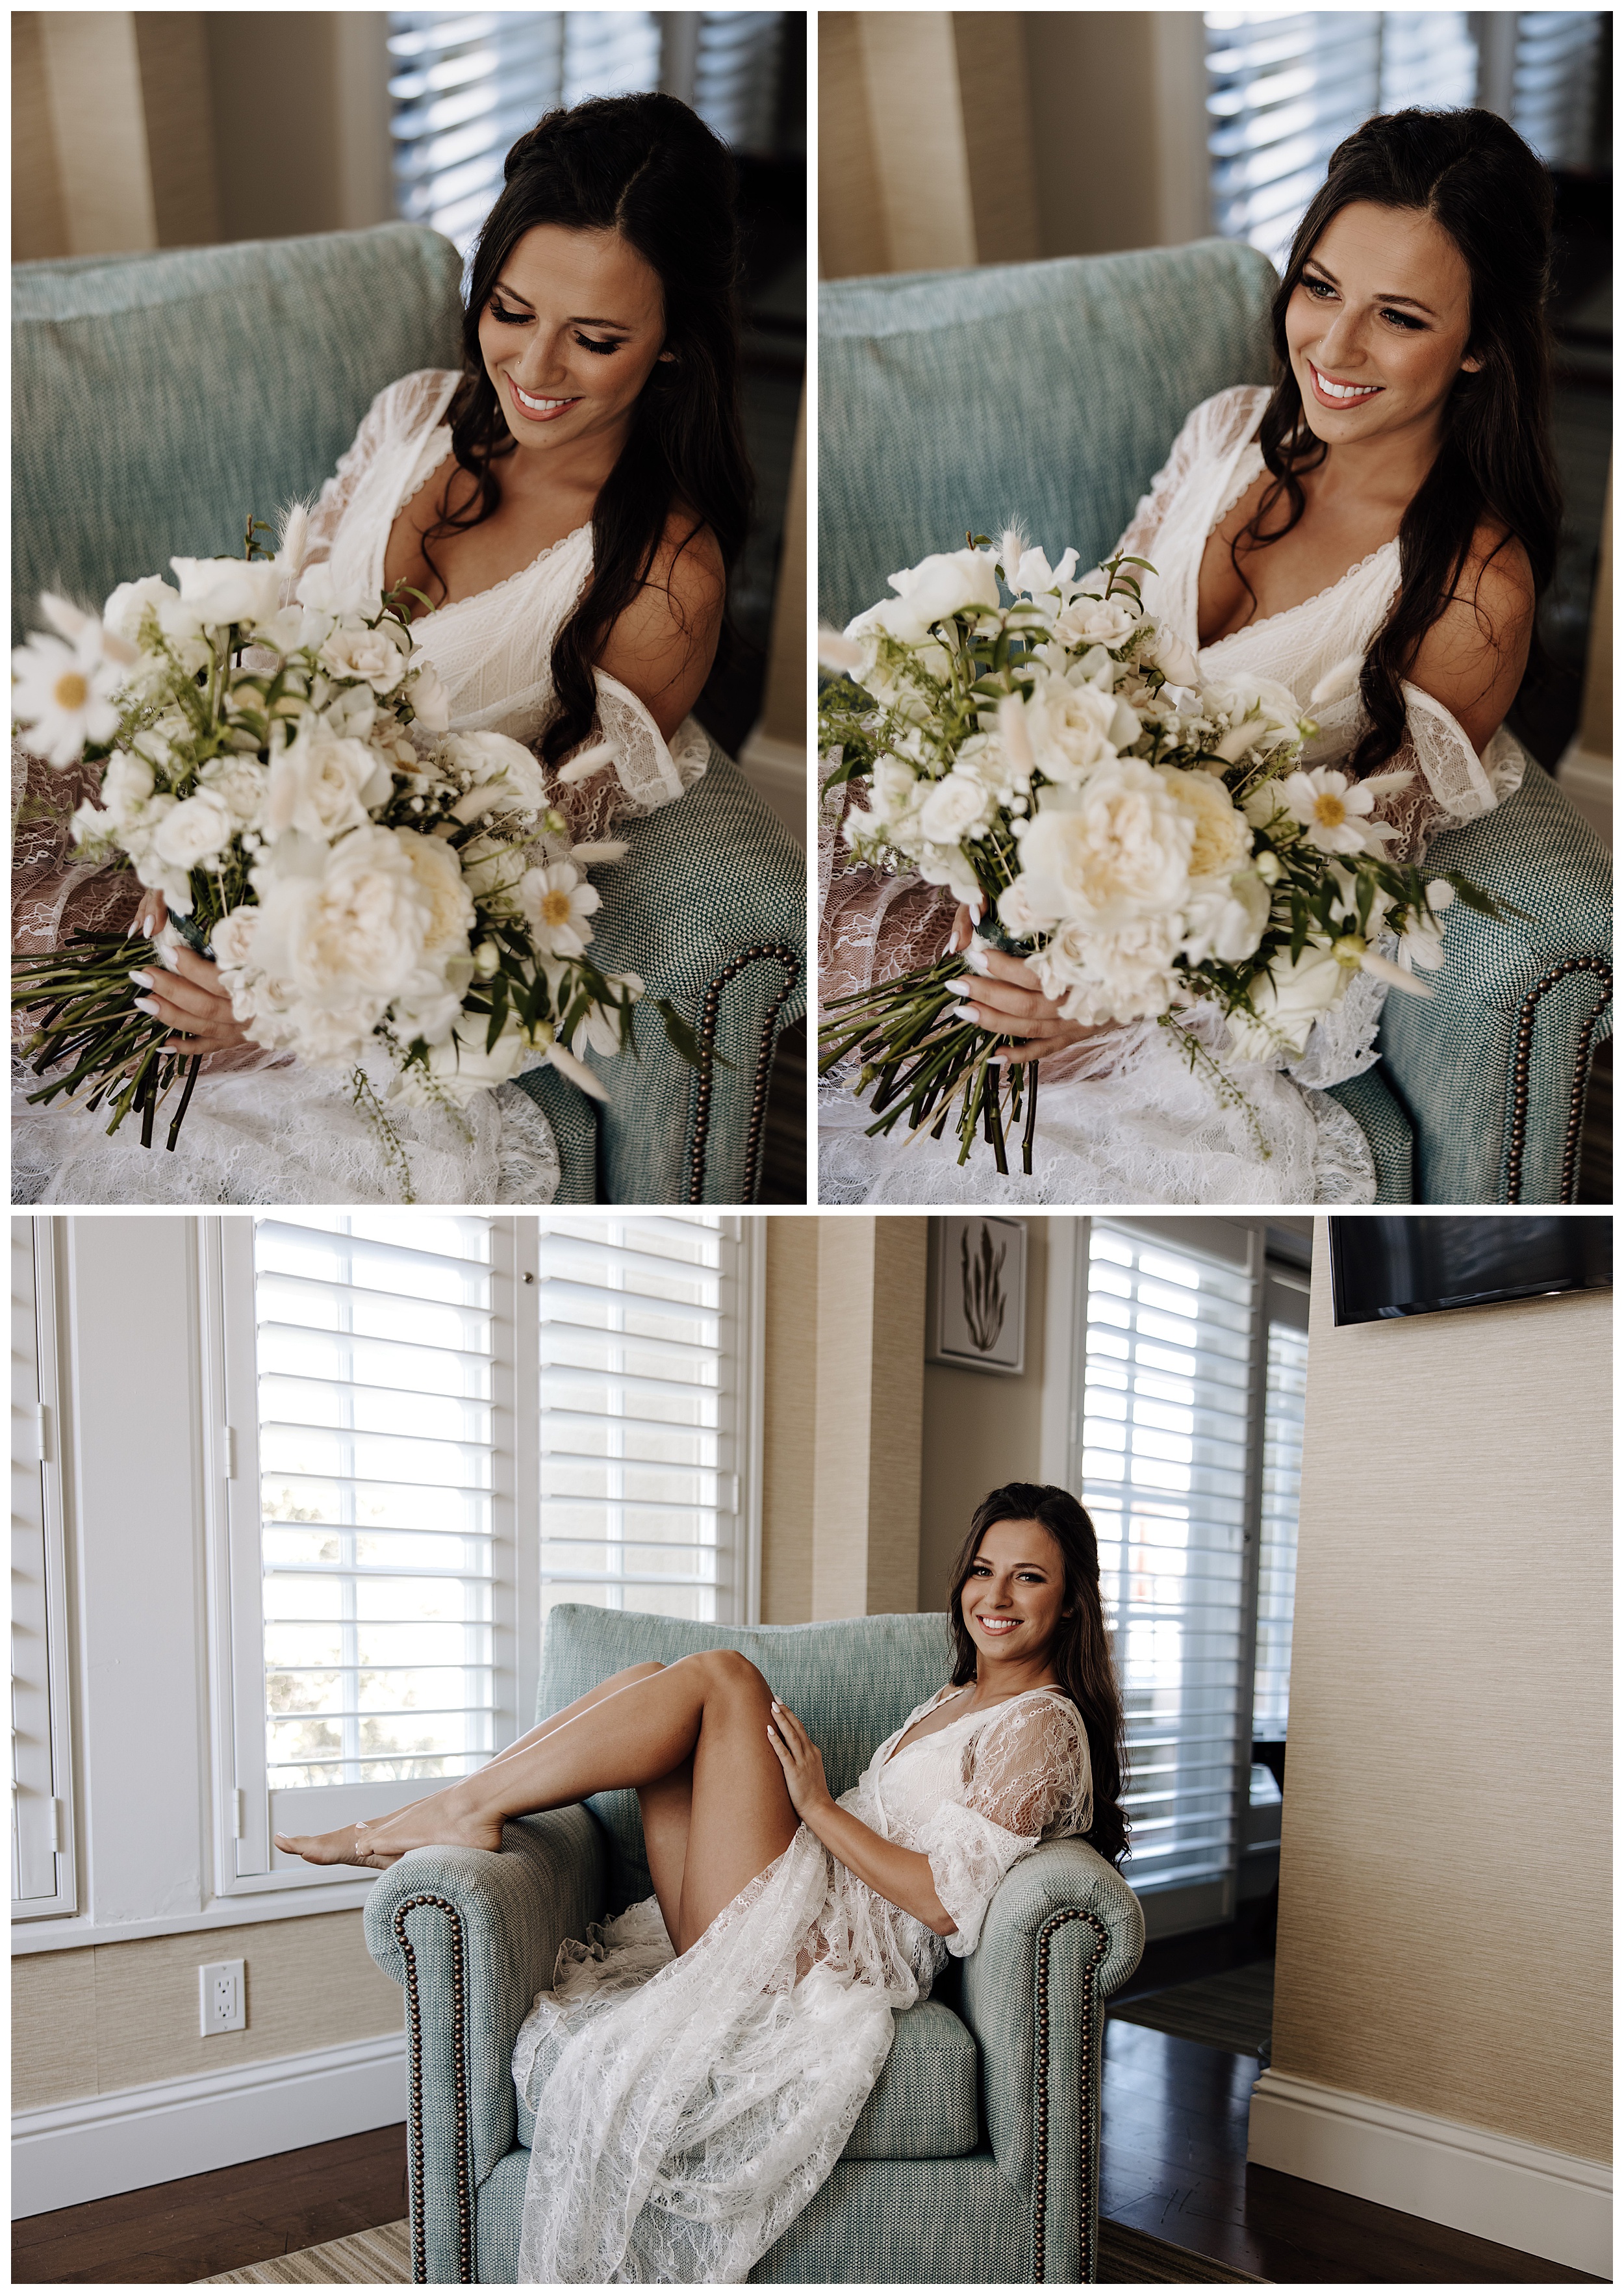 bride sitting on couch, bride holding bouquet, bride getting ready